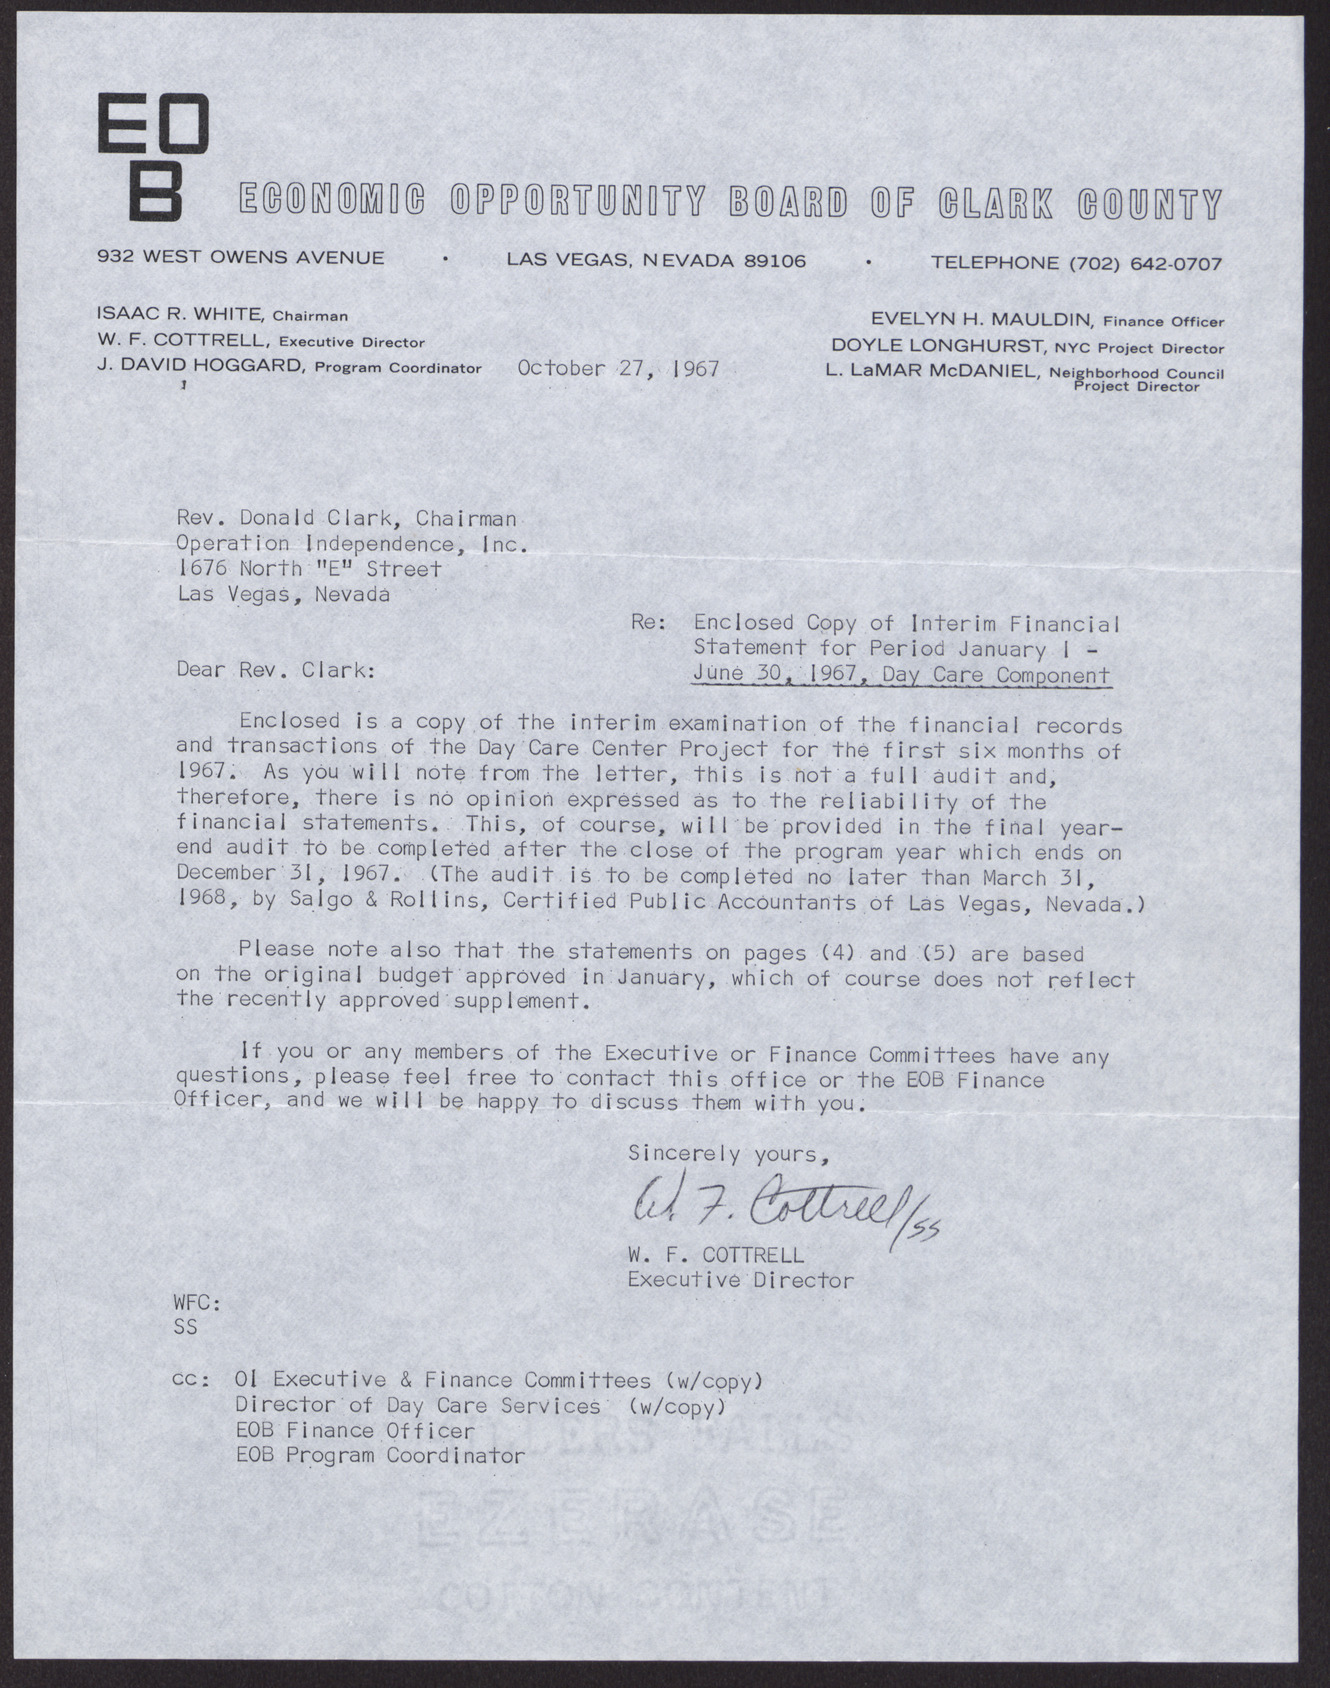 Letter to Rev. Donald Clark from W. F. Cottrell, October 27, 1967